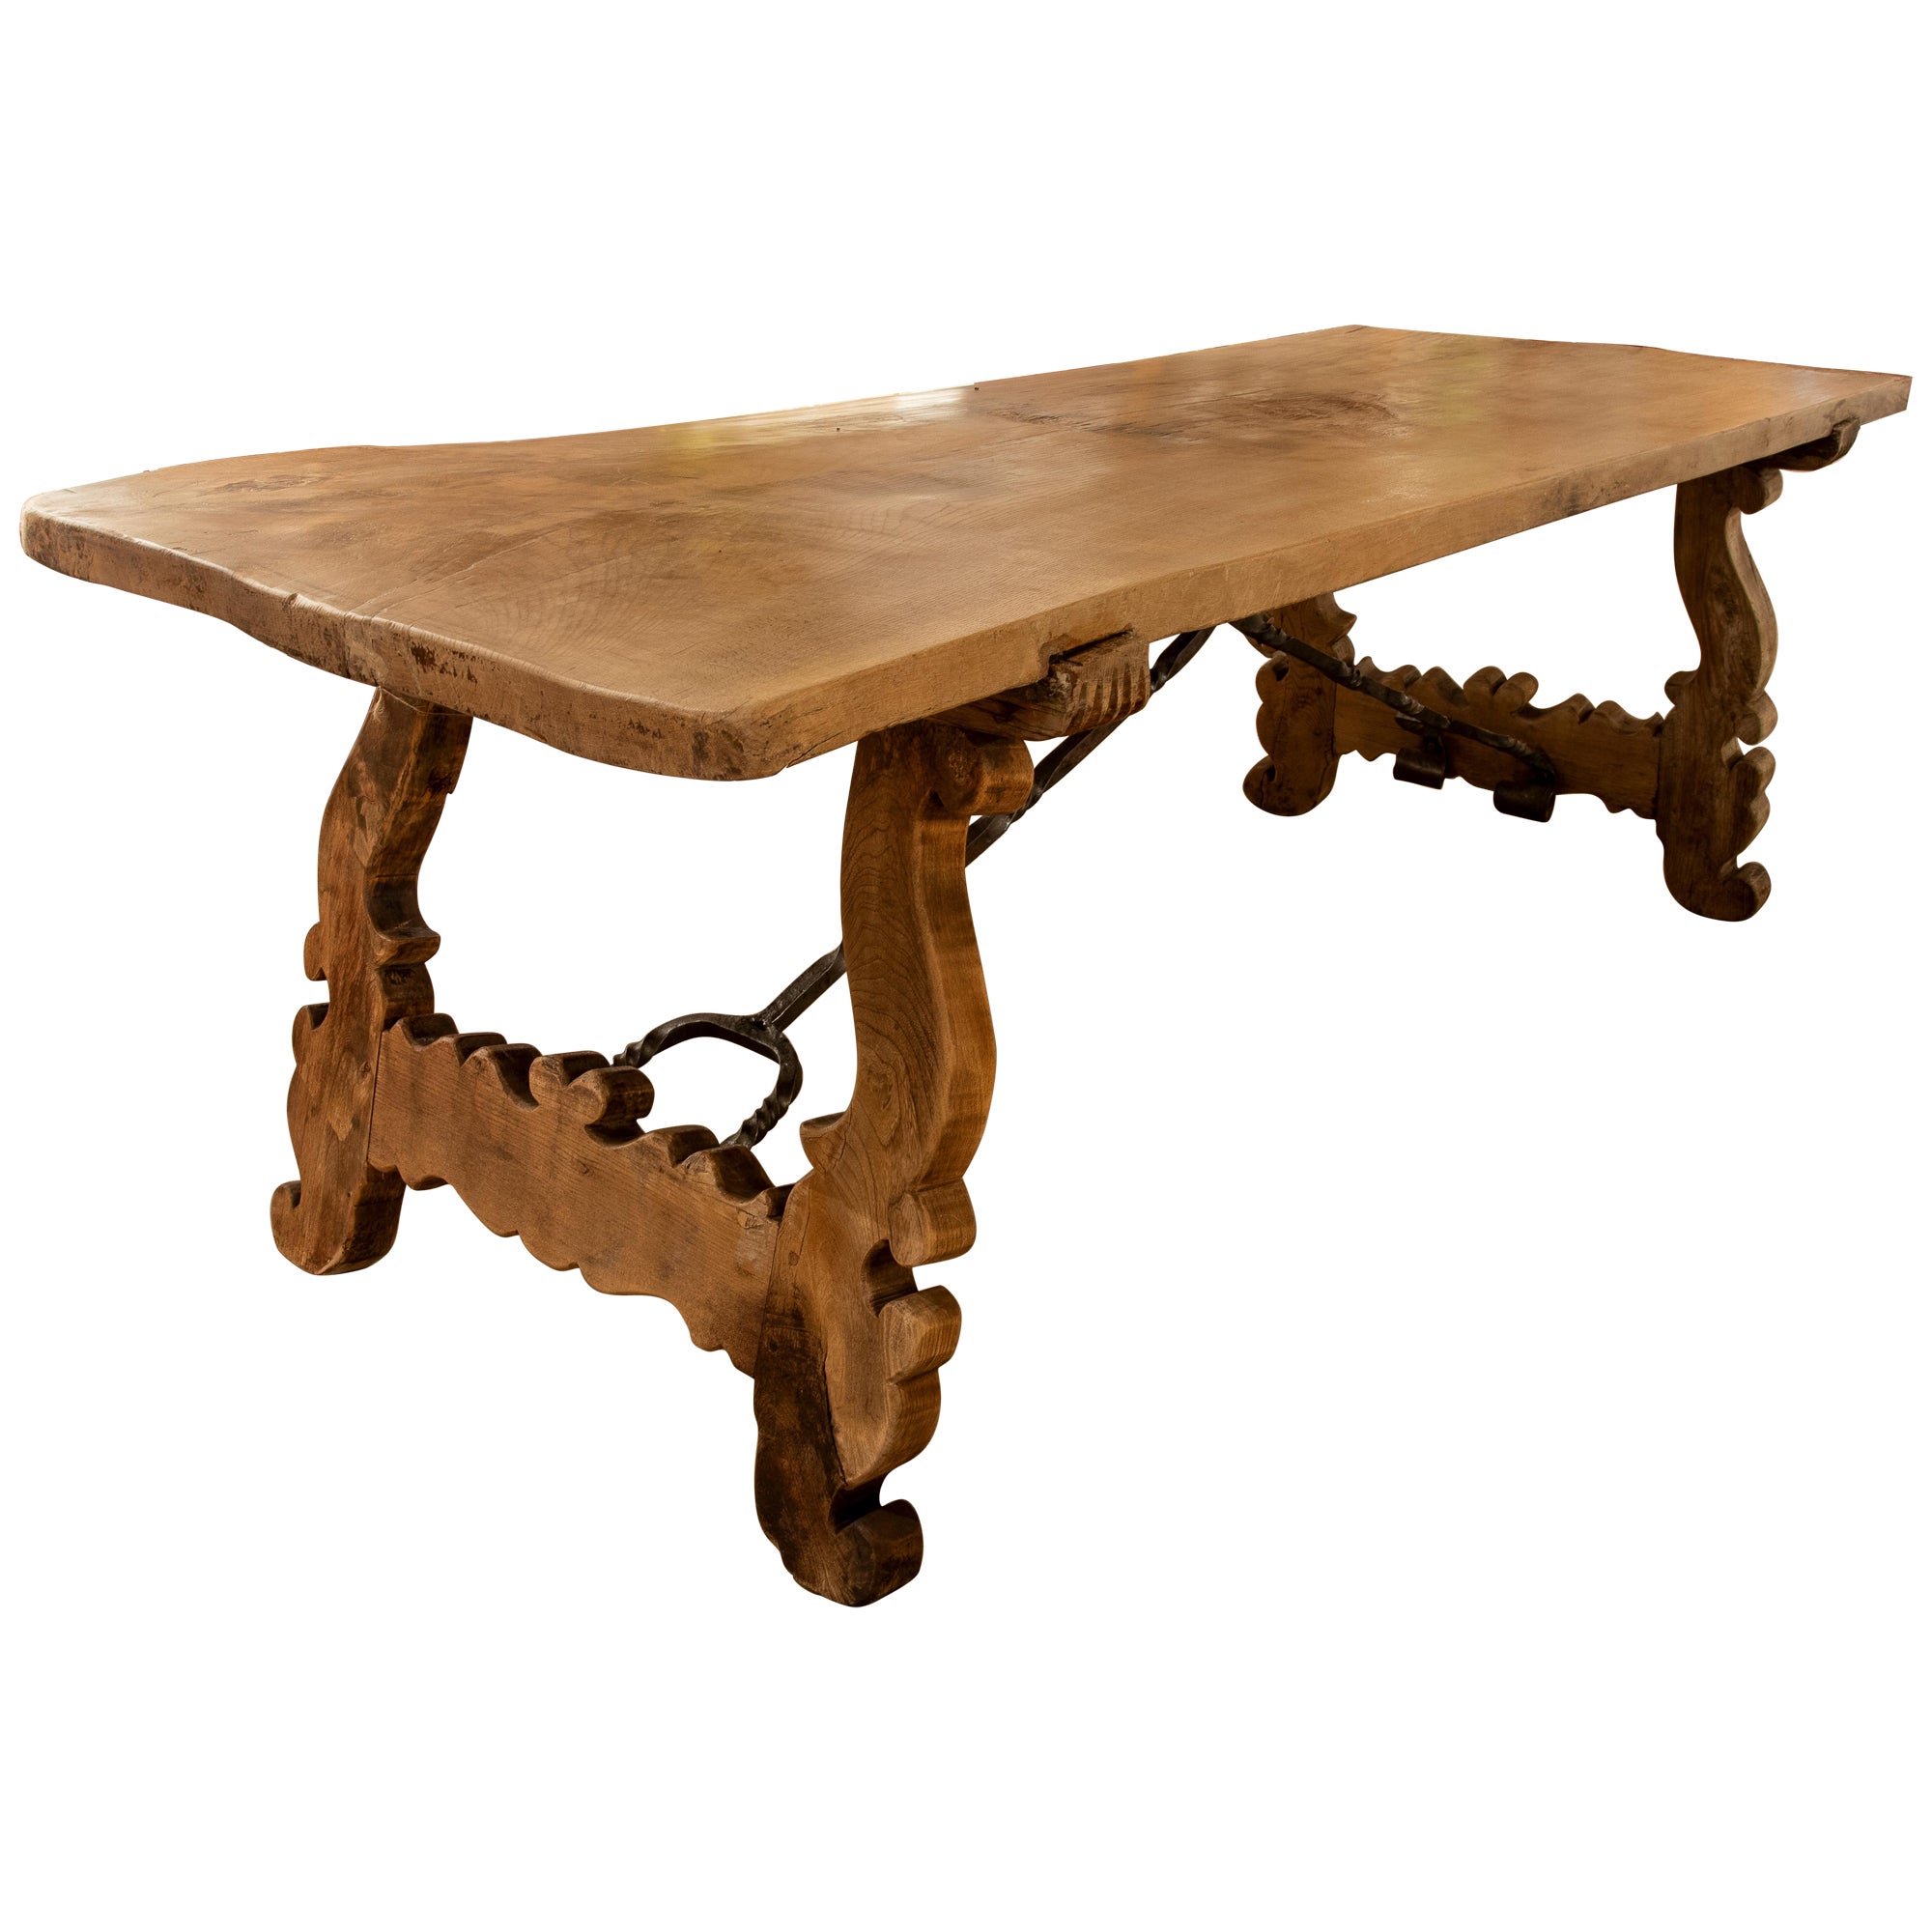 Spanish Large Wooden Table with Hand-Carved Legs and Original Iron Fittings For Sale